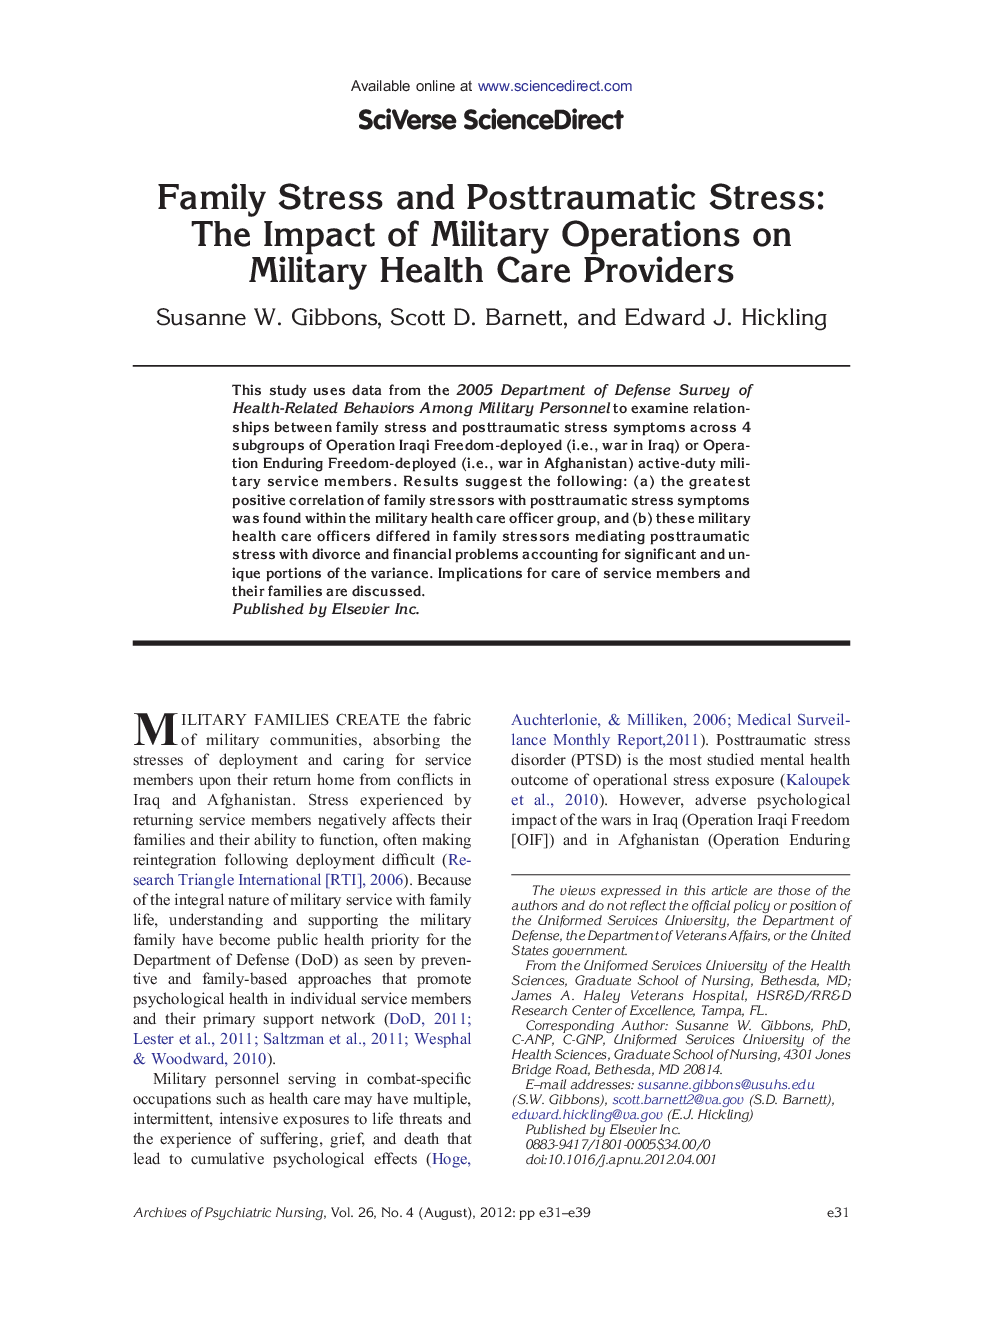 Family Stress and Posttraumatic Stress: The Impact of Military Operations on Military Health Care Providers 